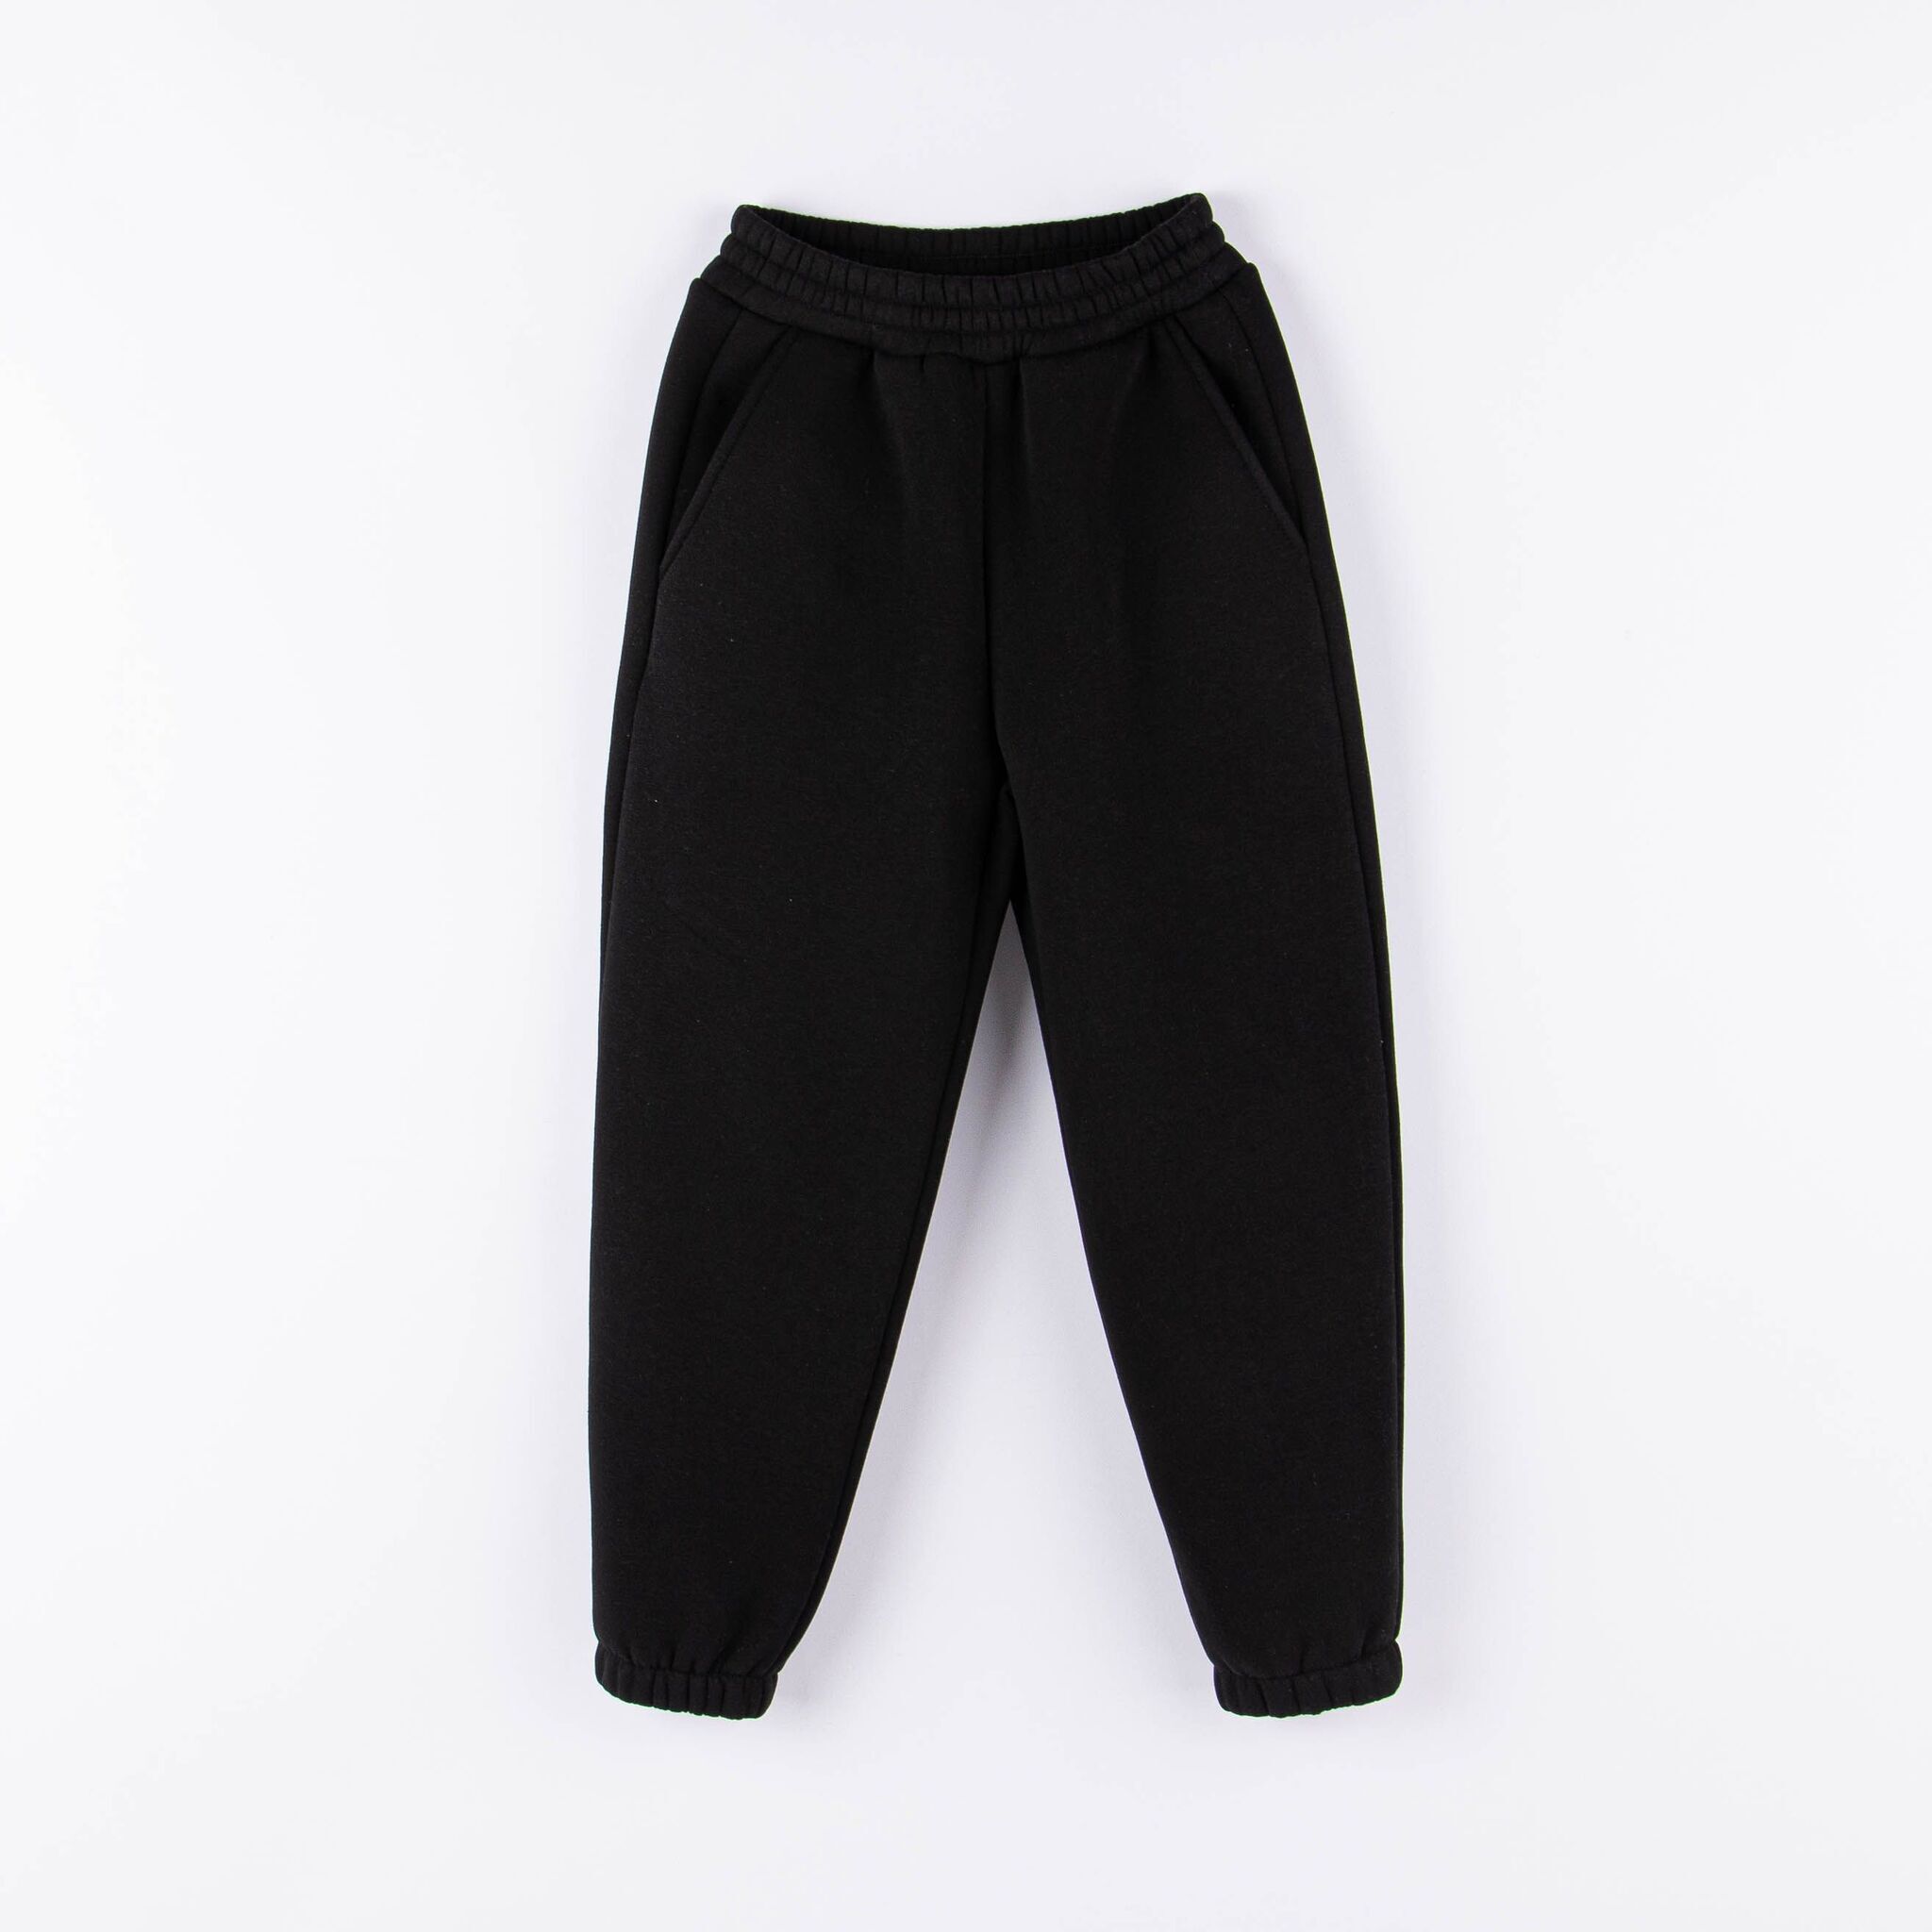 Warm joggers for teens - ONYX